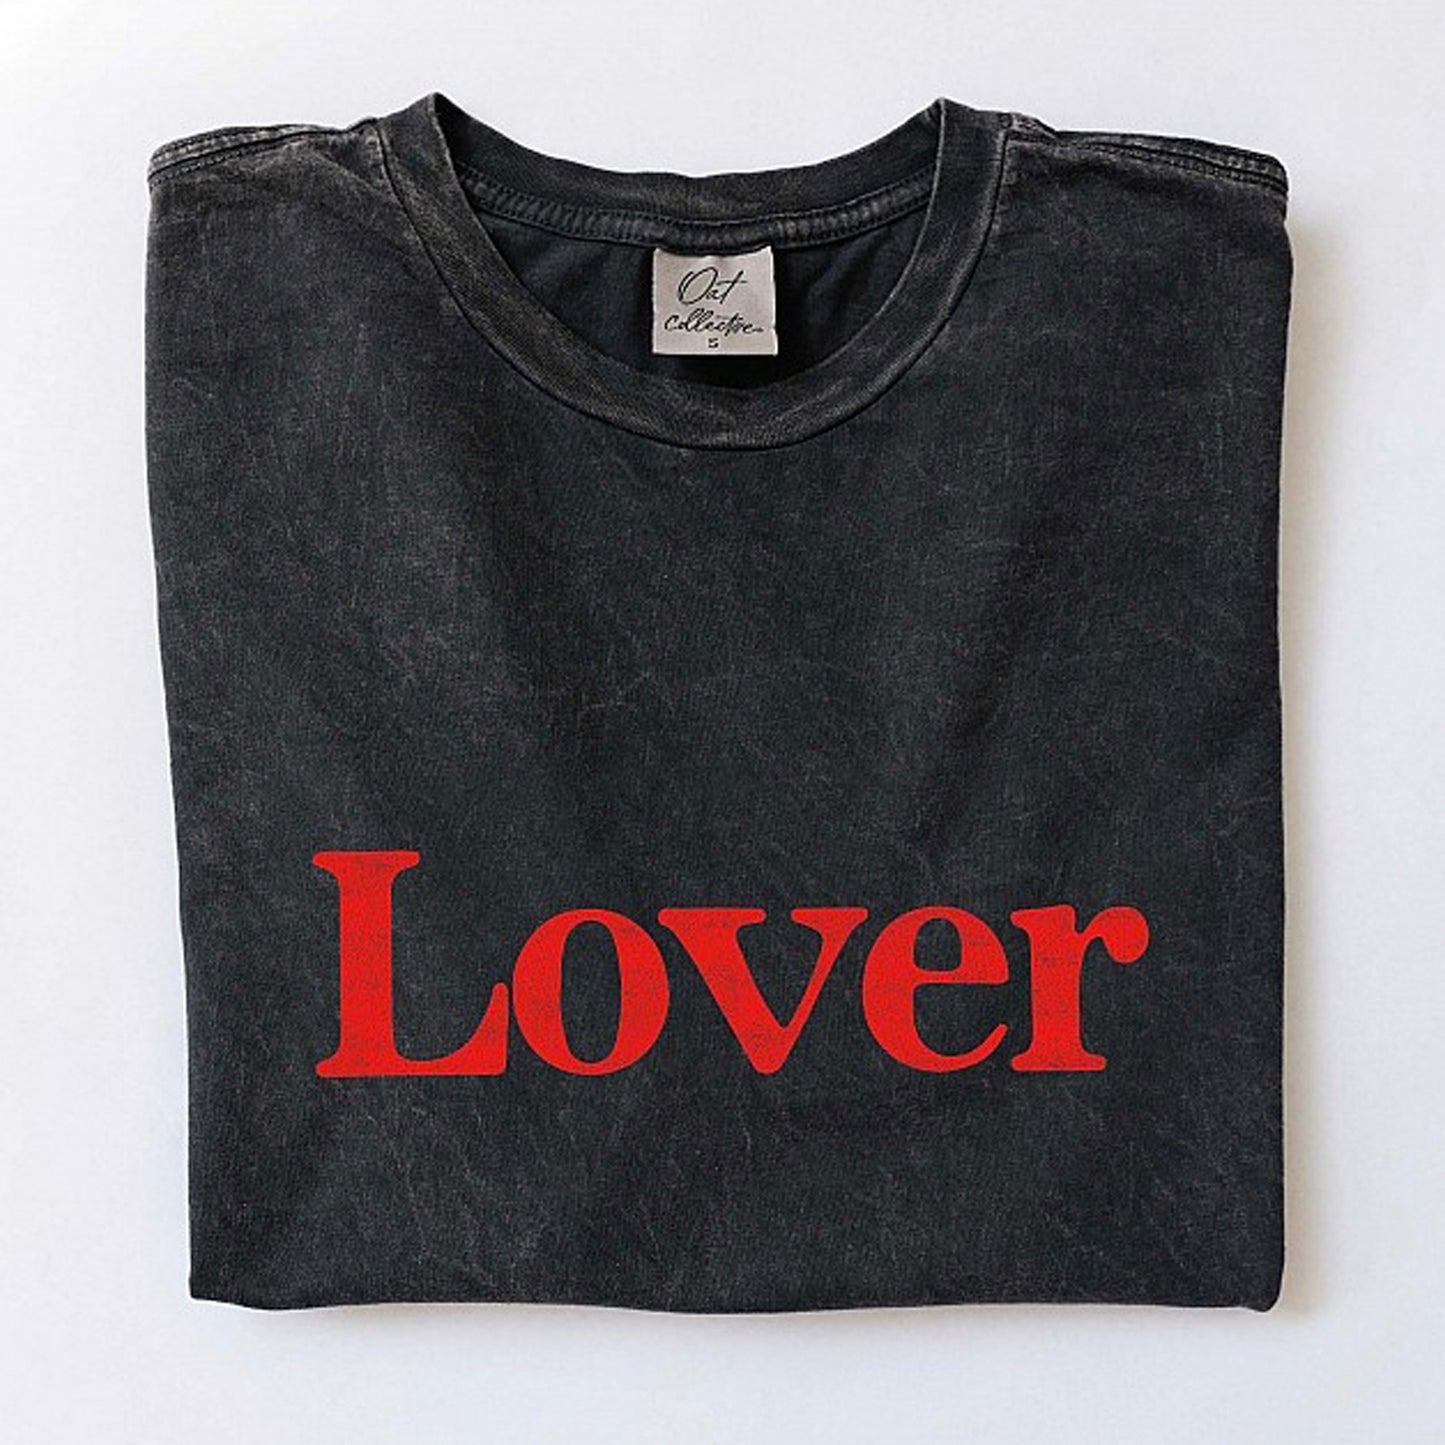 Lover Women's Graphic Tee, Mineral Black